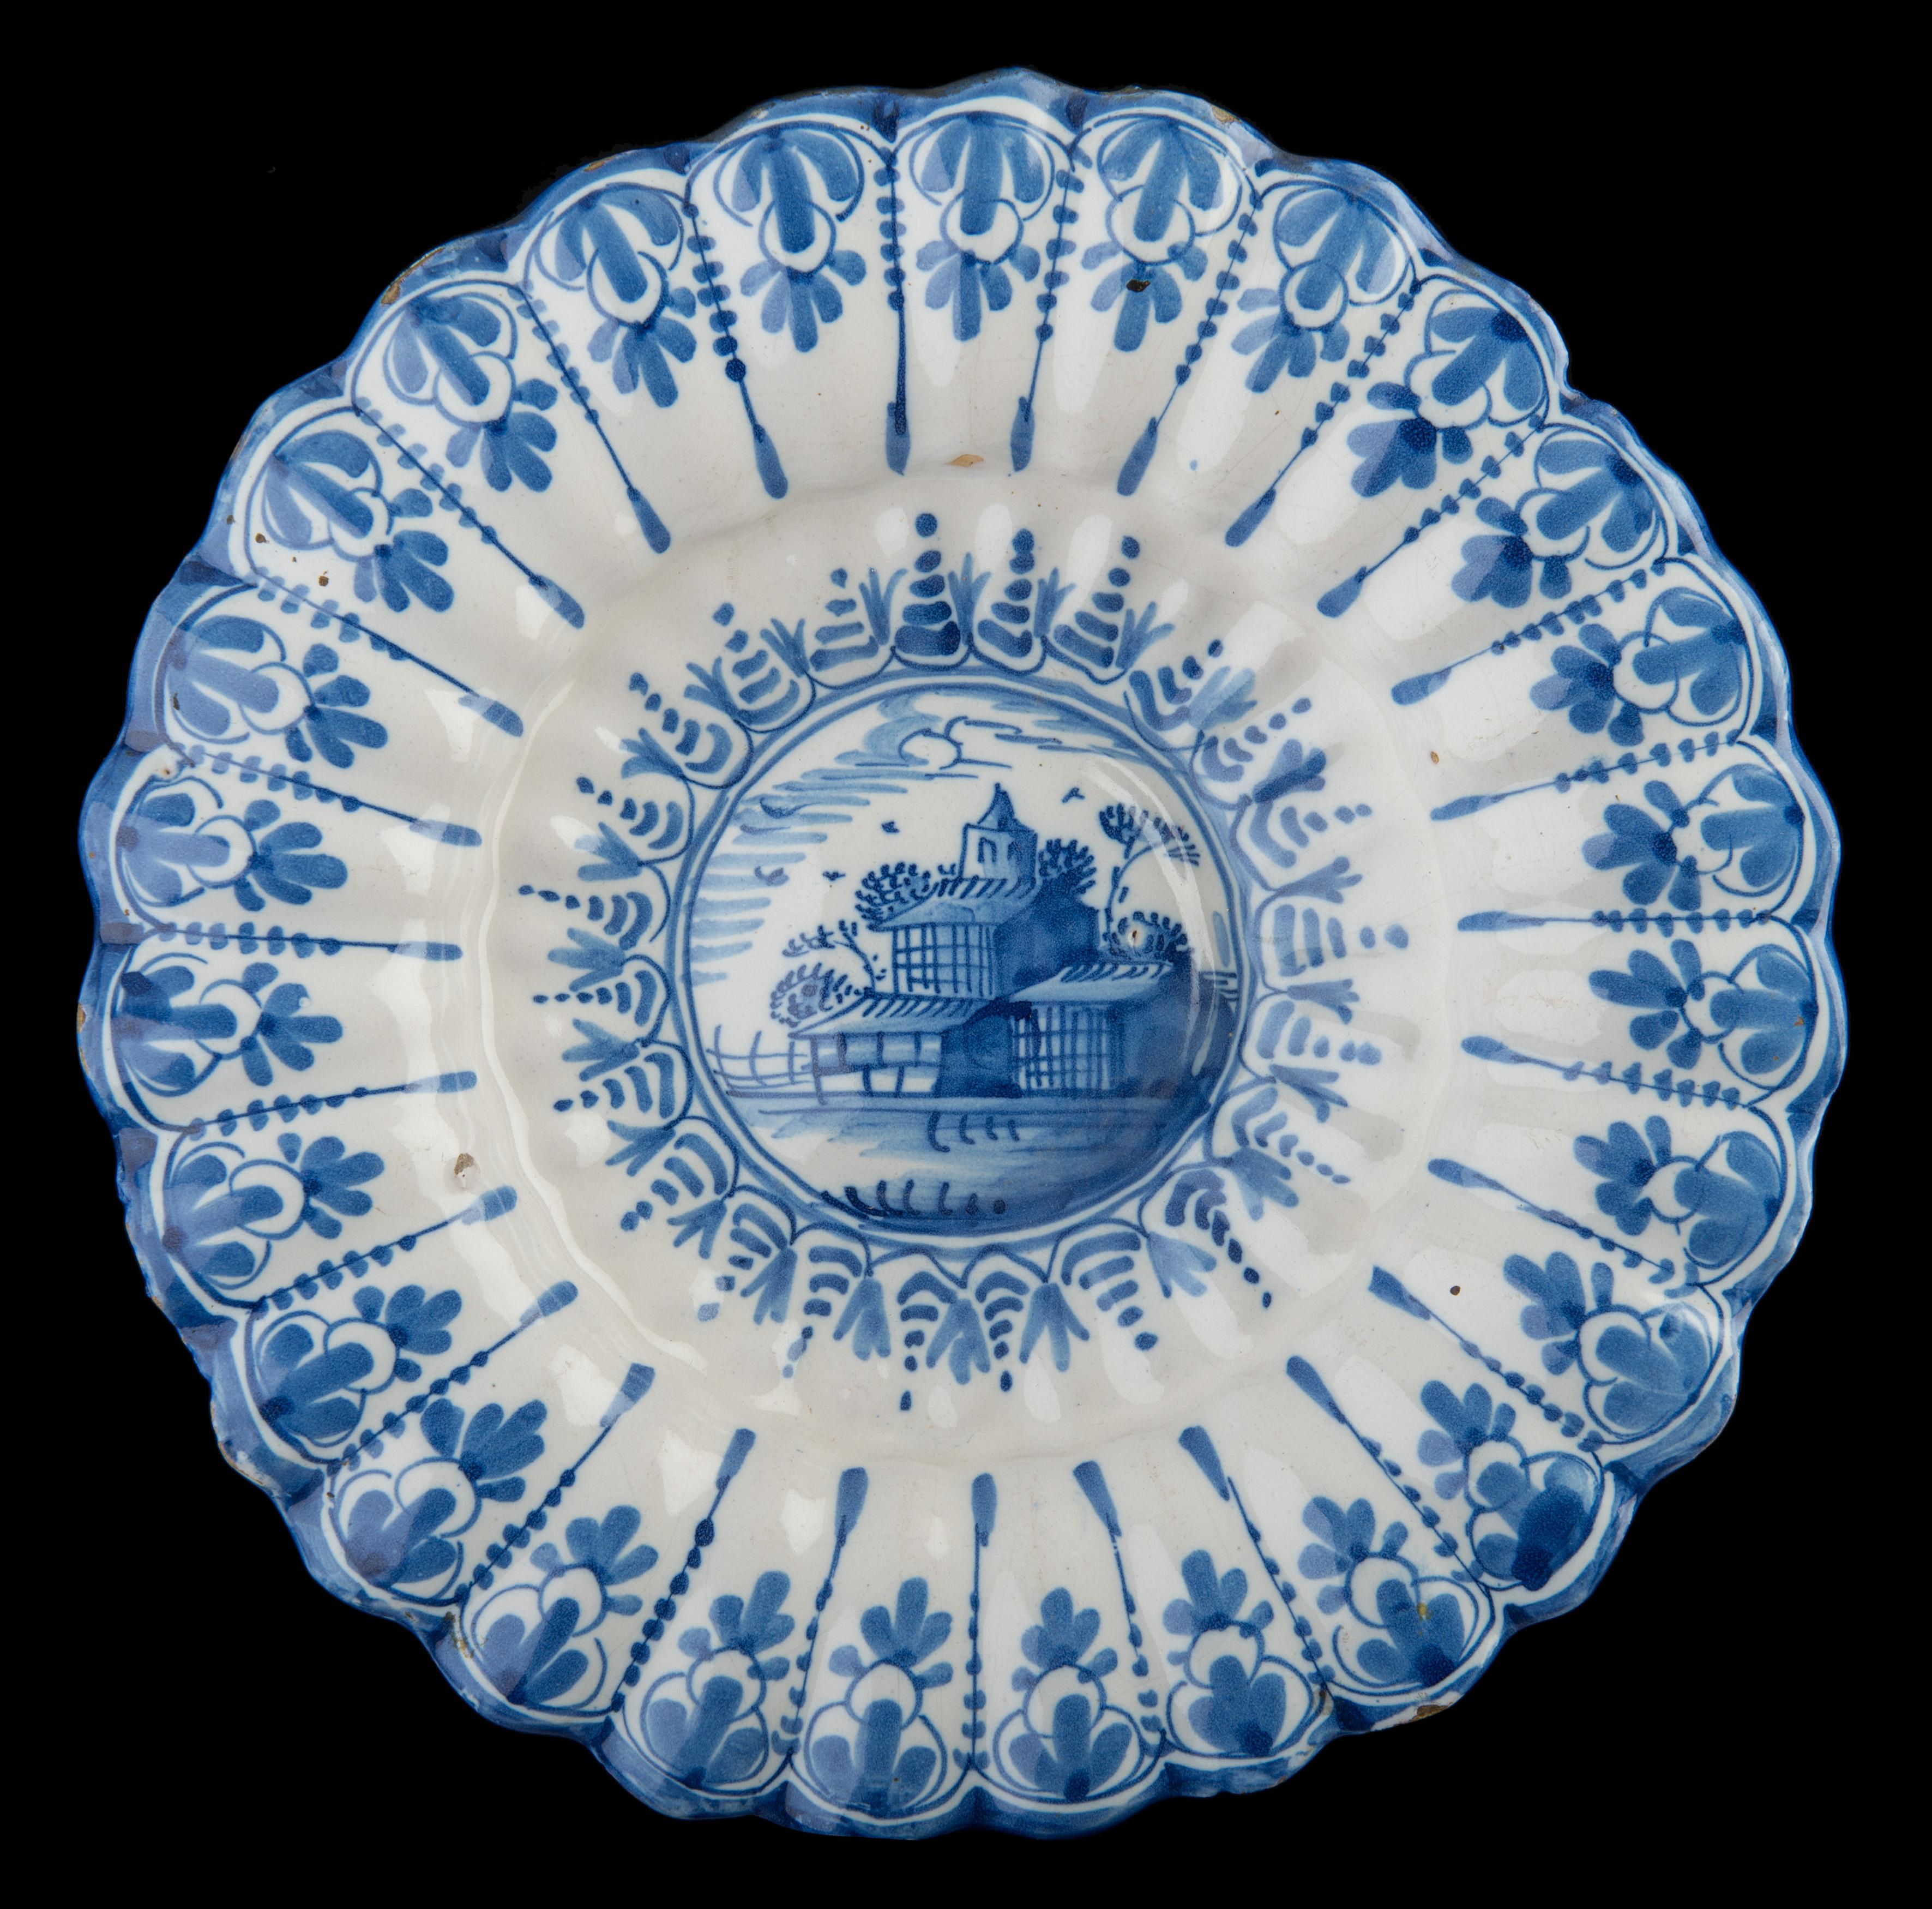 Blue and white lobed dish with landscape. Northern Netherlands, 1640-1660.
Dimensions: diameter 29,1 cm / 11.41 in.

The blue and white dish is composed of twenty-seven double lobes. The curved center is painted with a simplified landscape within